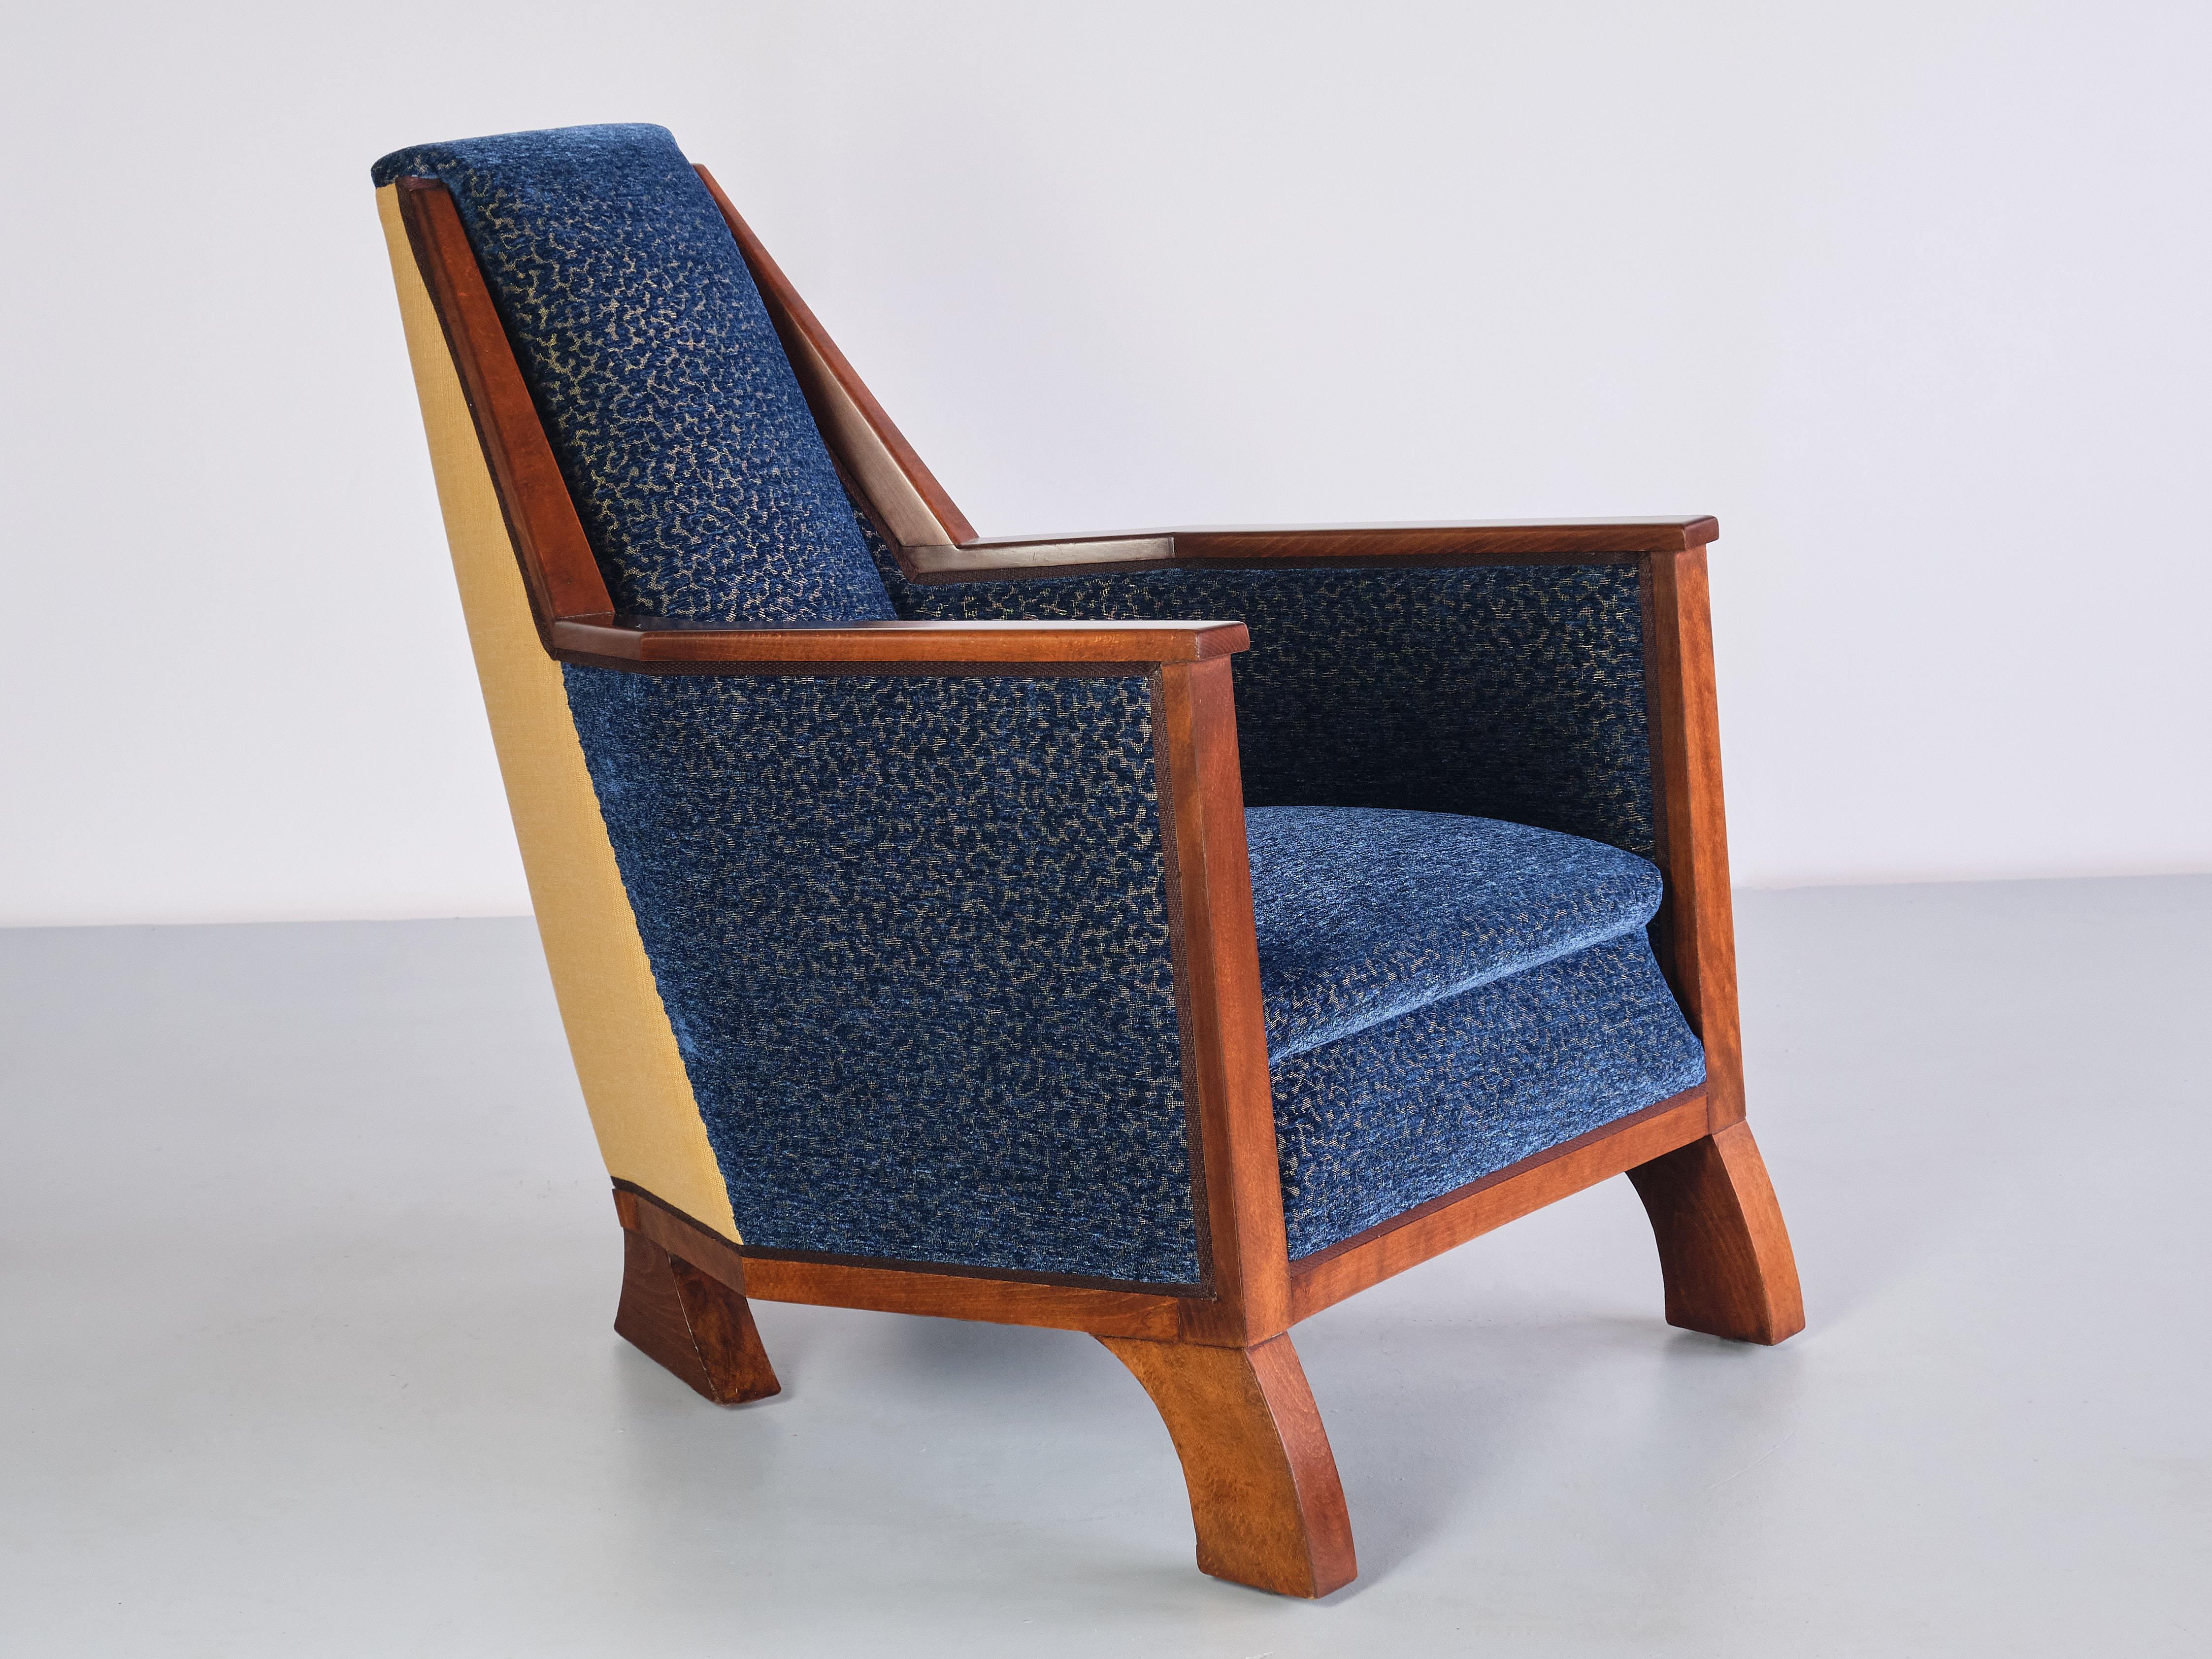 This exceptional armchair was produced by a master cabinetmaker in Northern France in the late 1920s. The chair was designed for a private residence in the Roubaix region.

The different angles and shapes of the chair make this a highly original and